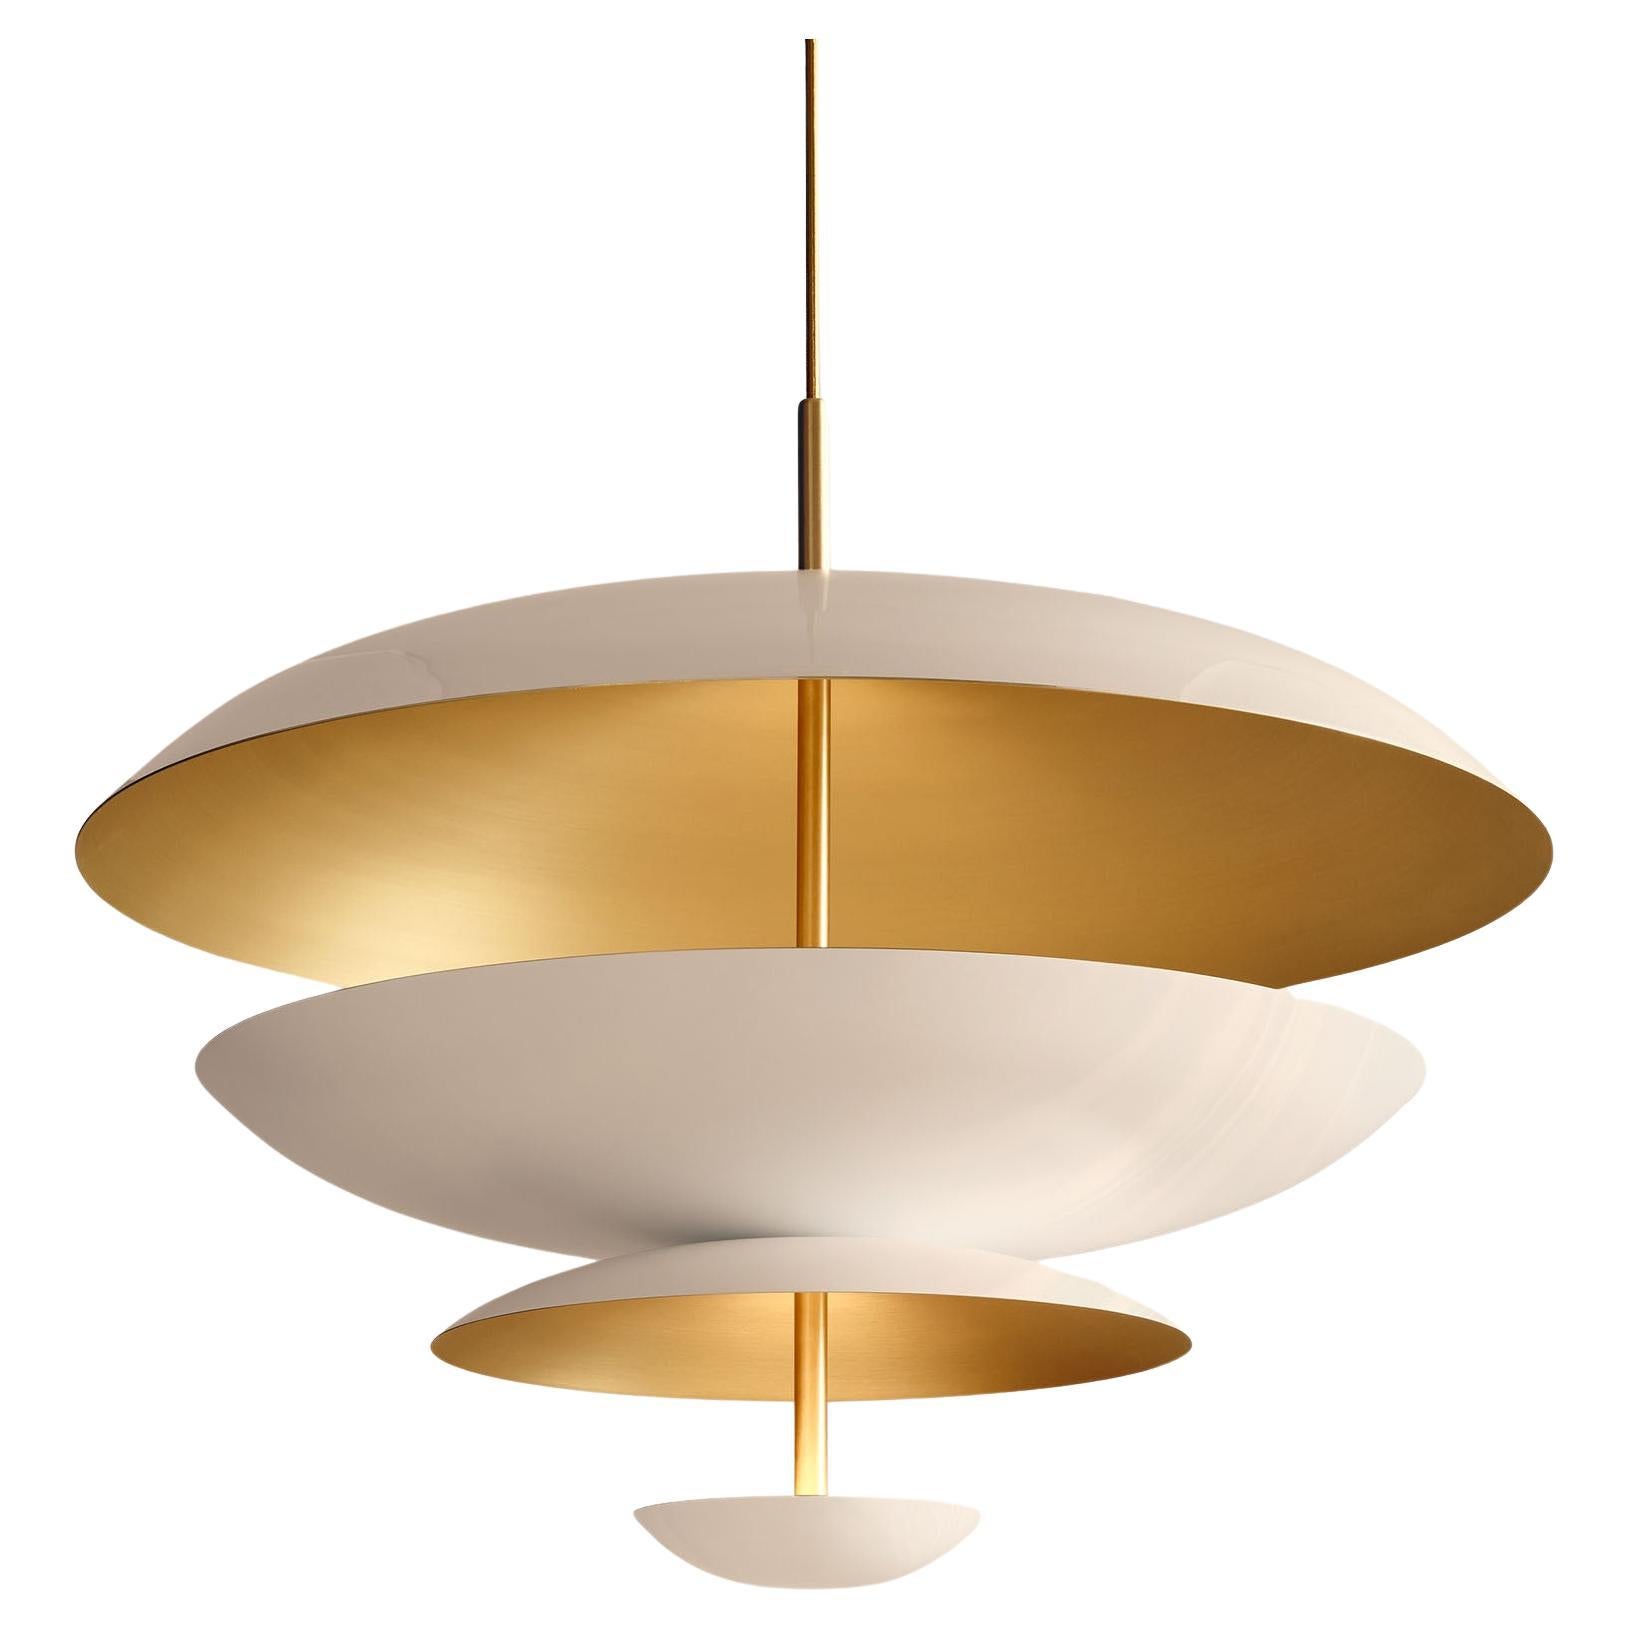 'Cosmic Purion Chandelier 70' Handmade Piano Lacquered Brass Ceiling Lamp For Sale